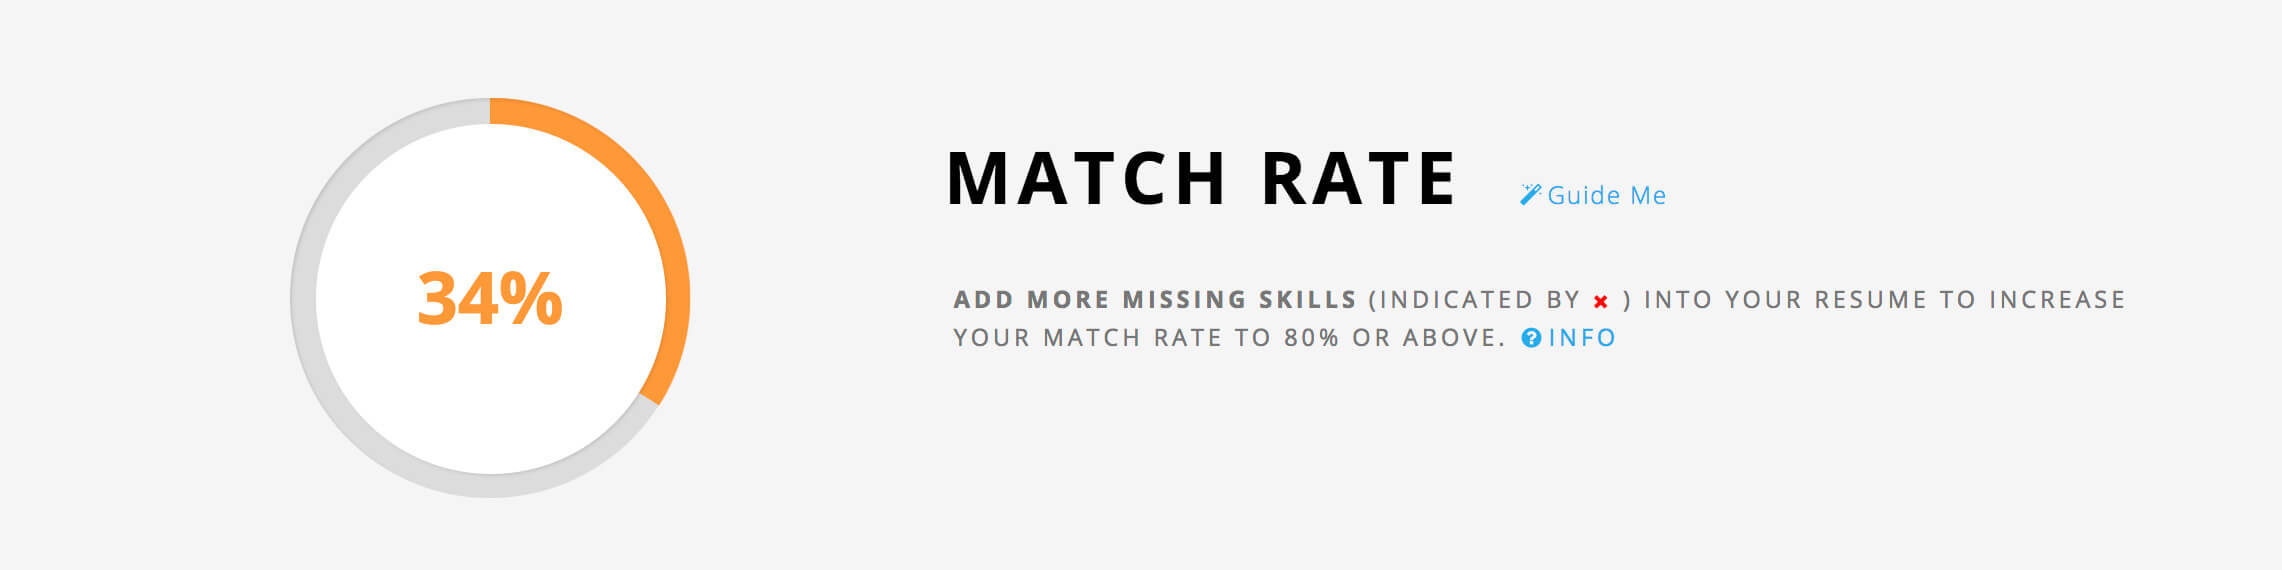 Jobscan match rate is a wake up call for career coach clients.